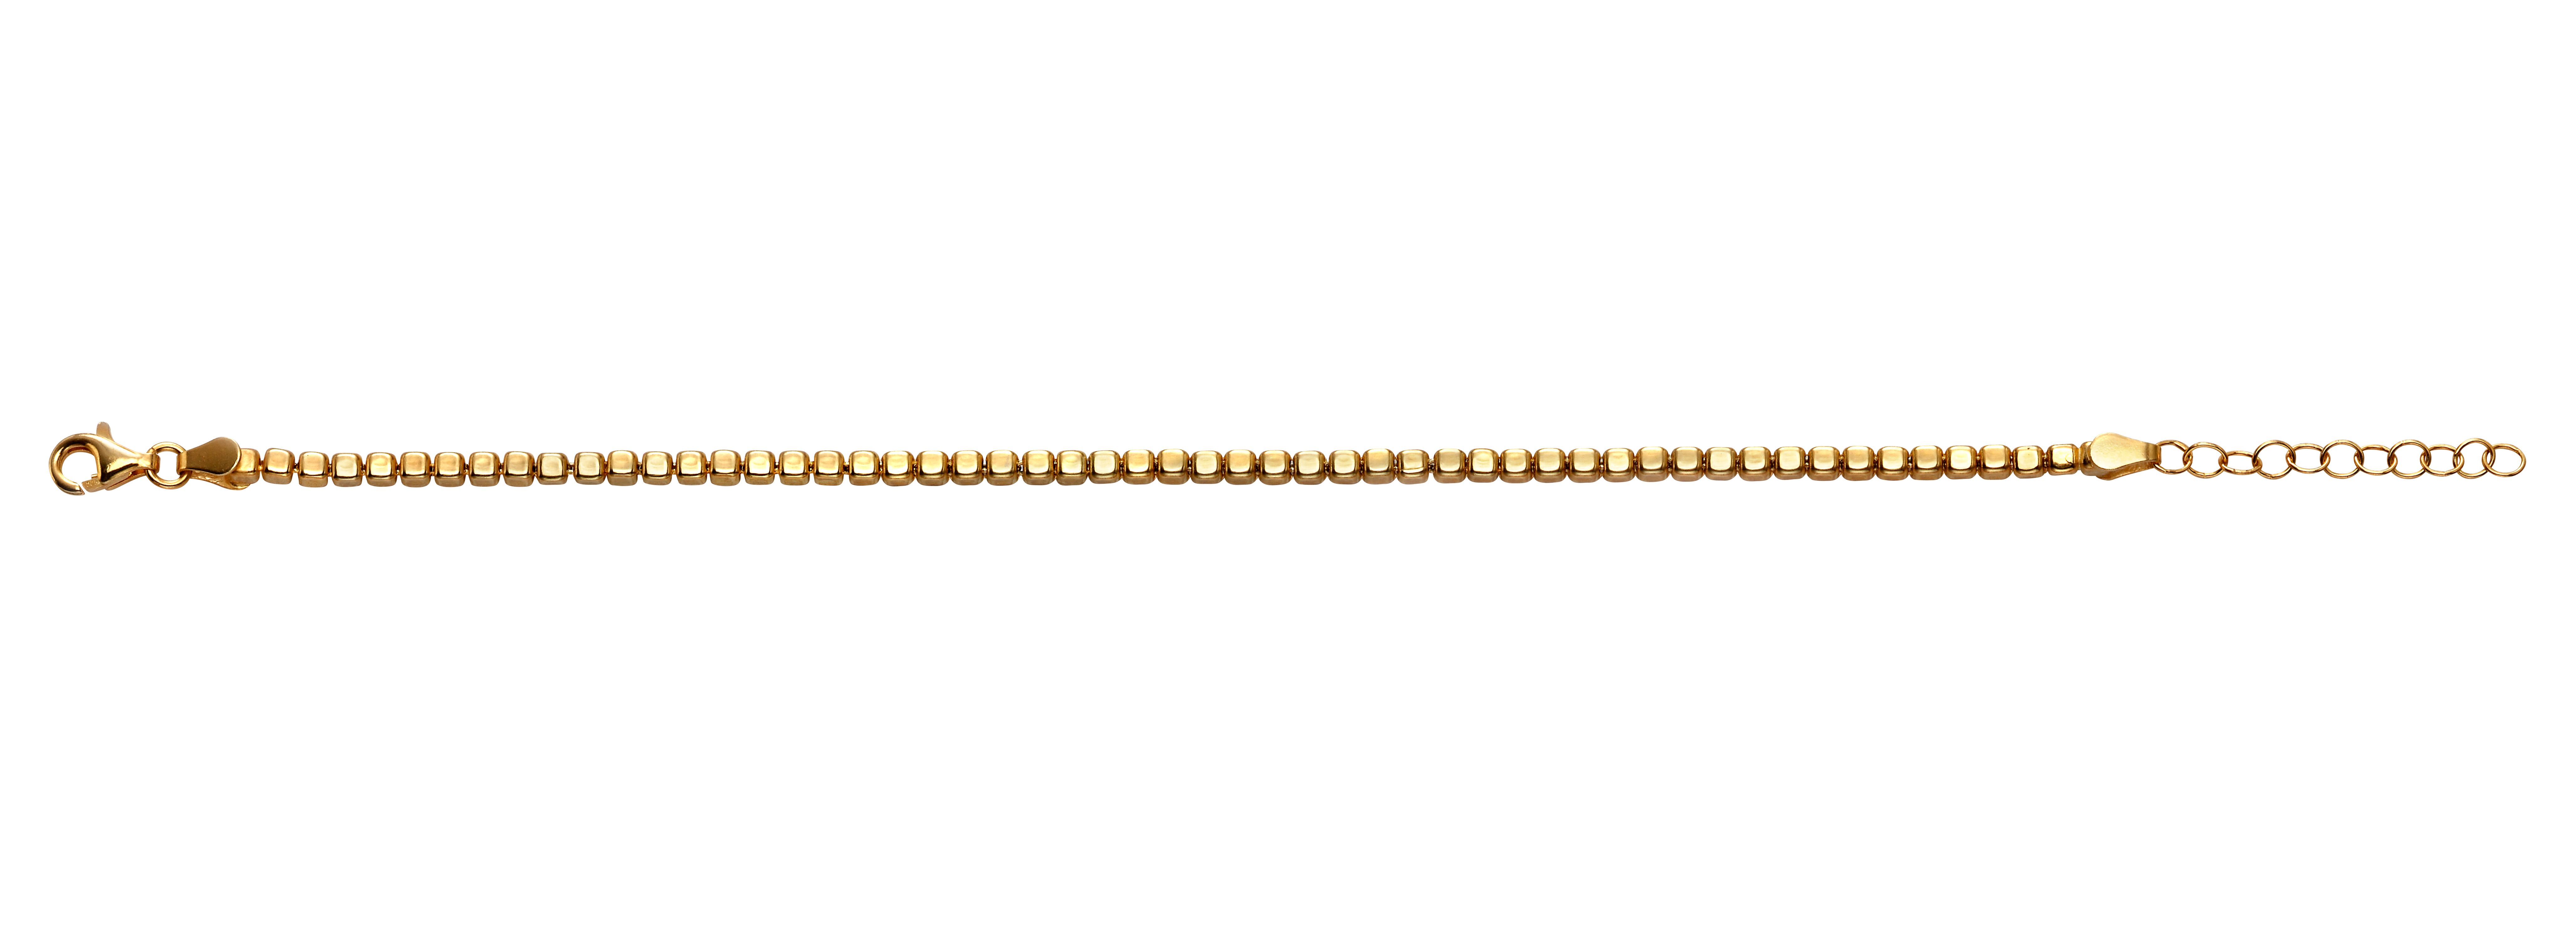 Yellow Gold plate Cube Bracelet<li>Modern gold cube link design bracelet<li>Bracelet length 17cm with a 3cm extender<li>Lobster clasp<li>Crafted from genuine gold plated sterling silver<li>Comes Complete with Branded Packaging